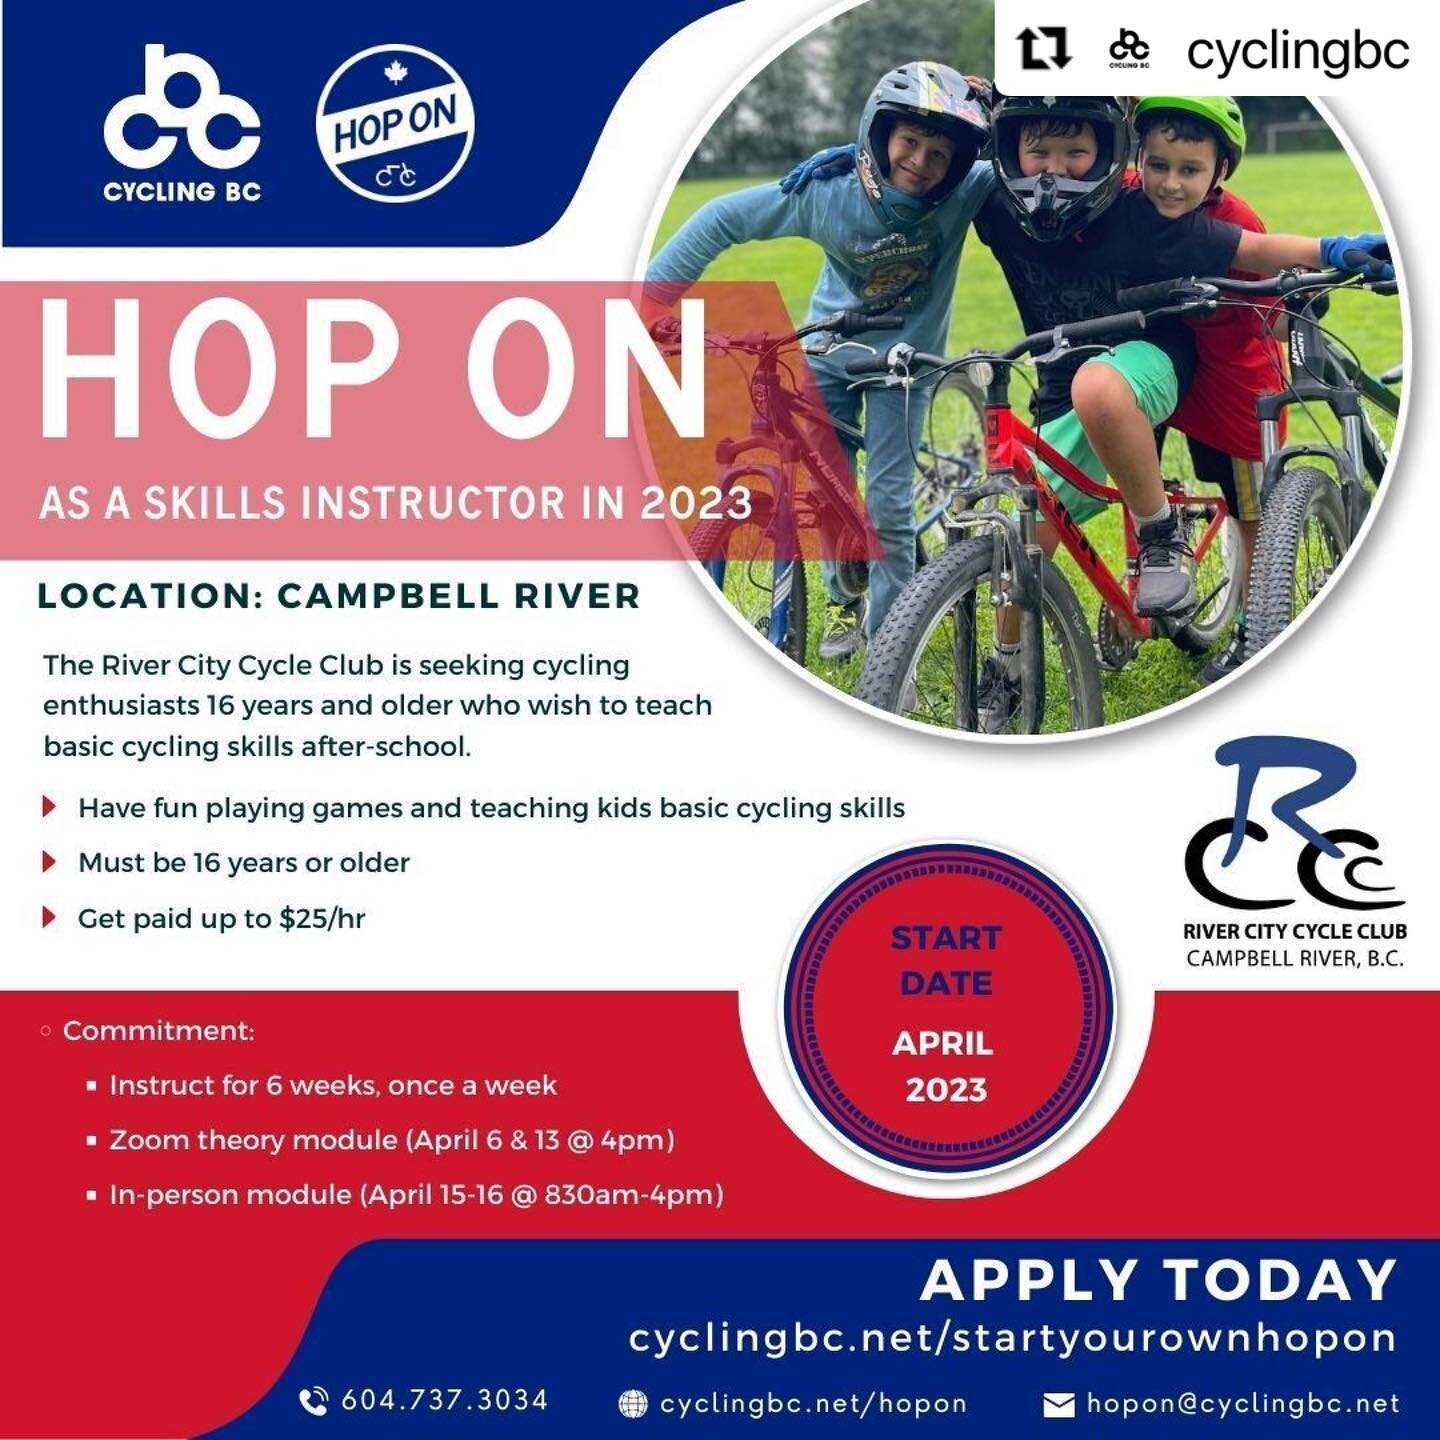 Interested in helping Campbell River youth learn cycling essentials?

We will be hosting Cycling BC Hop On Training April 15 and 16 in Campbell River, with additional required evening zoom session on April 11 and 13.  This is a community coaching cou